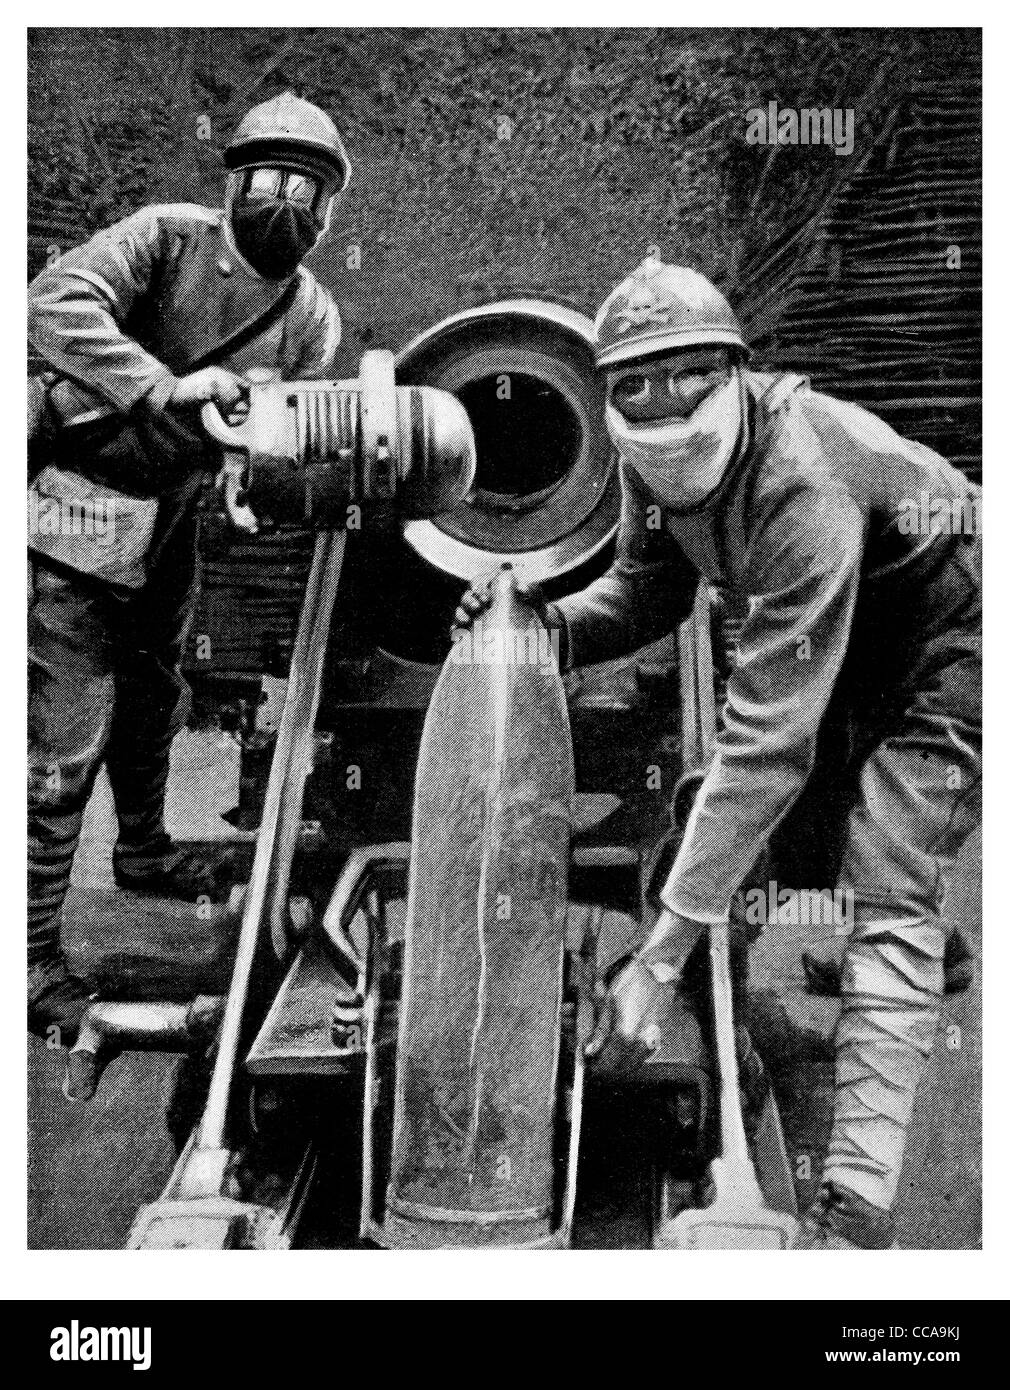 loading shell colossal howitzer Gas attack heavy artillery monster gunner  masks  French soldiers 1916 mask poison fumes Stock Photo